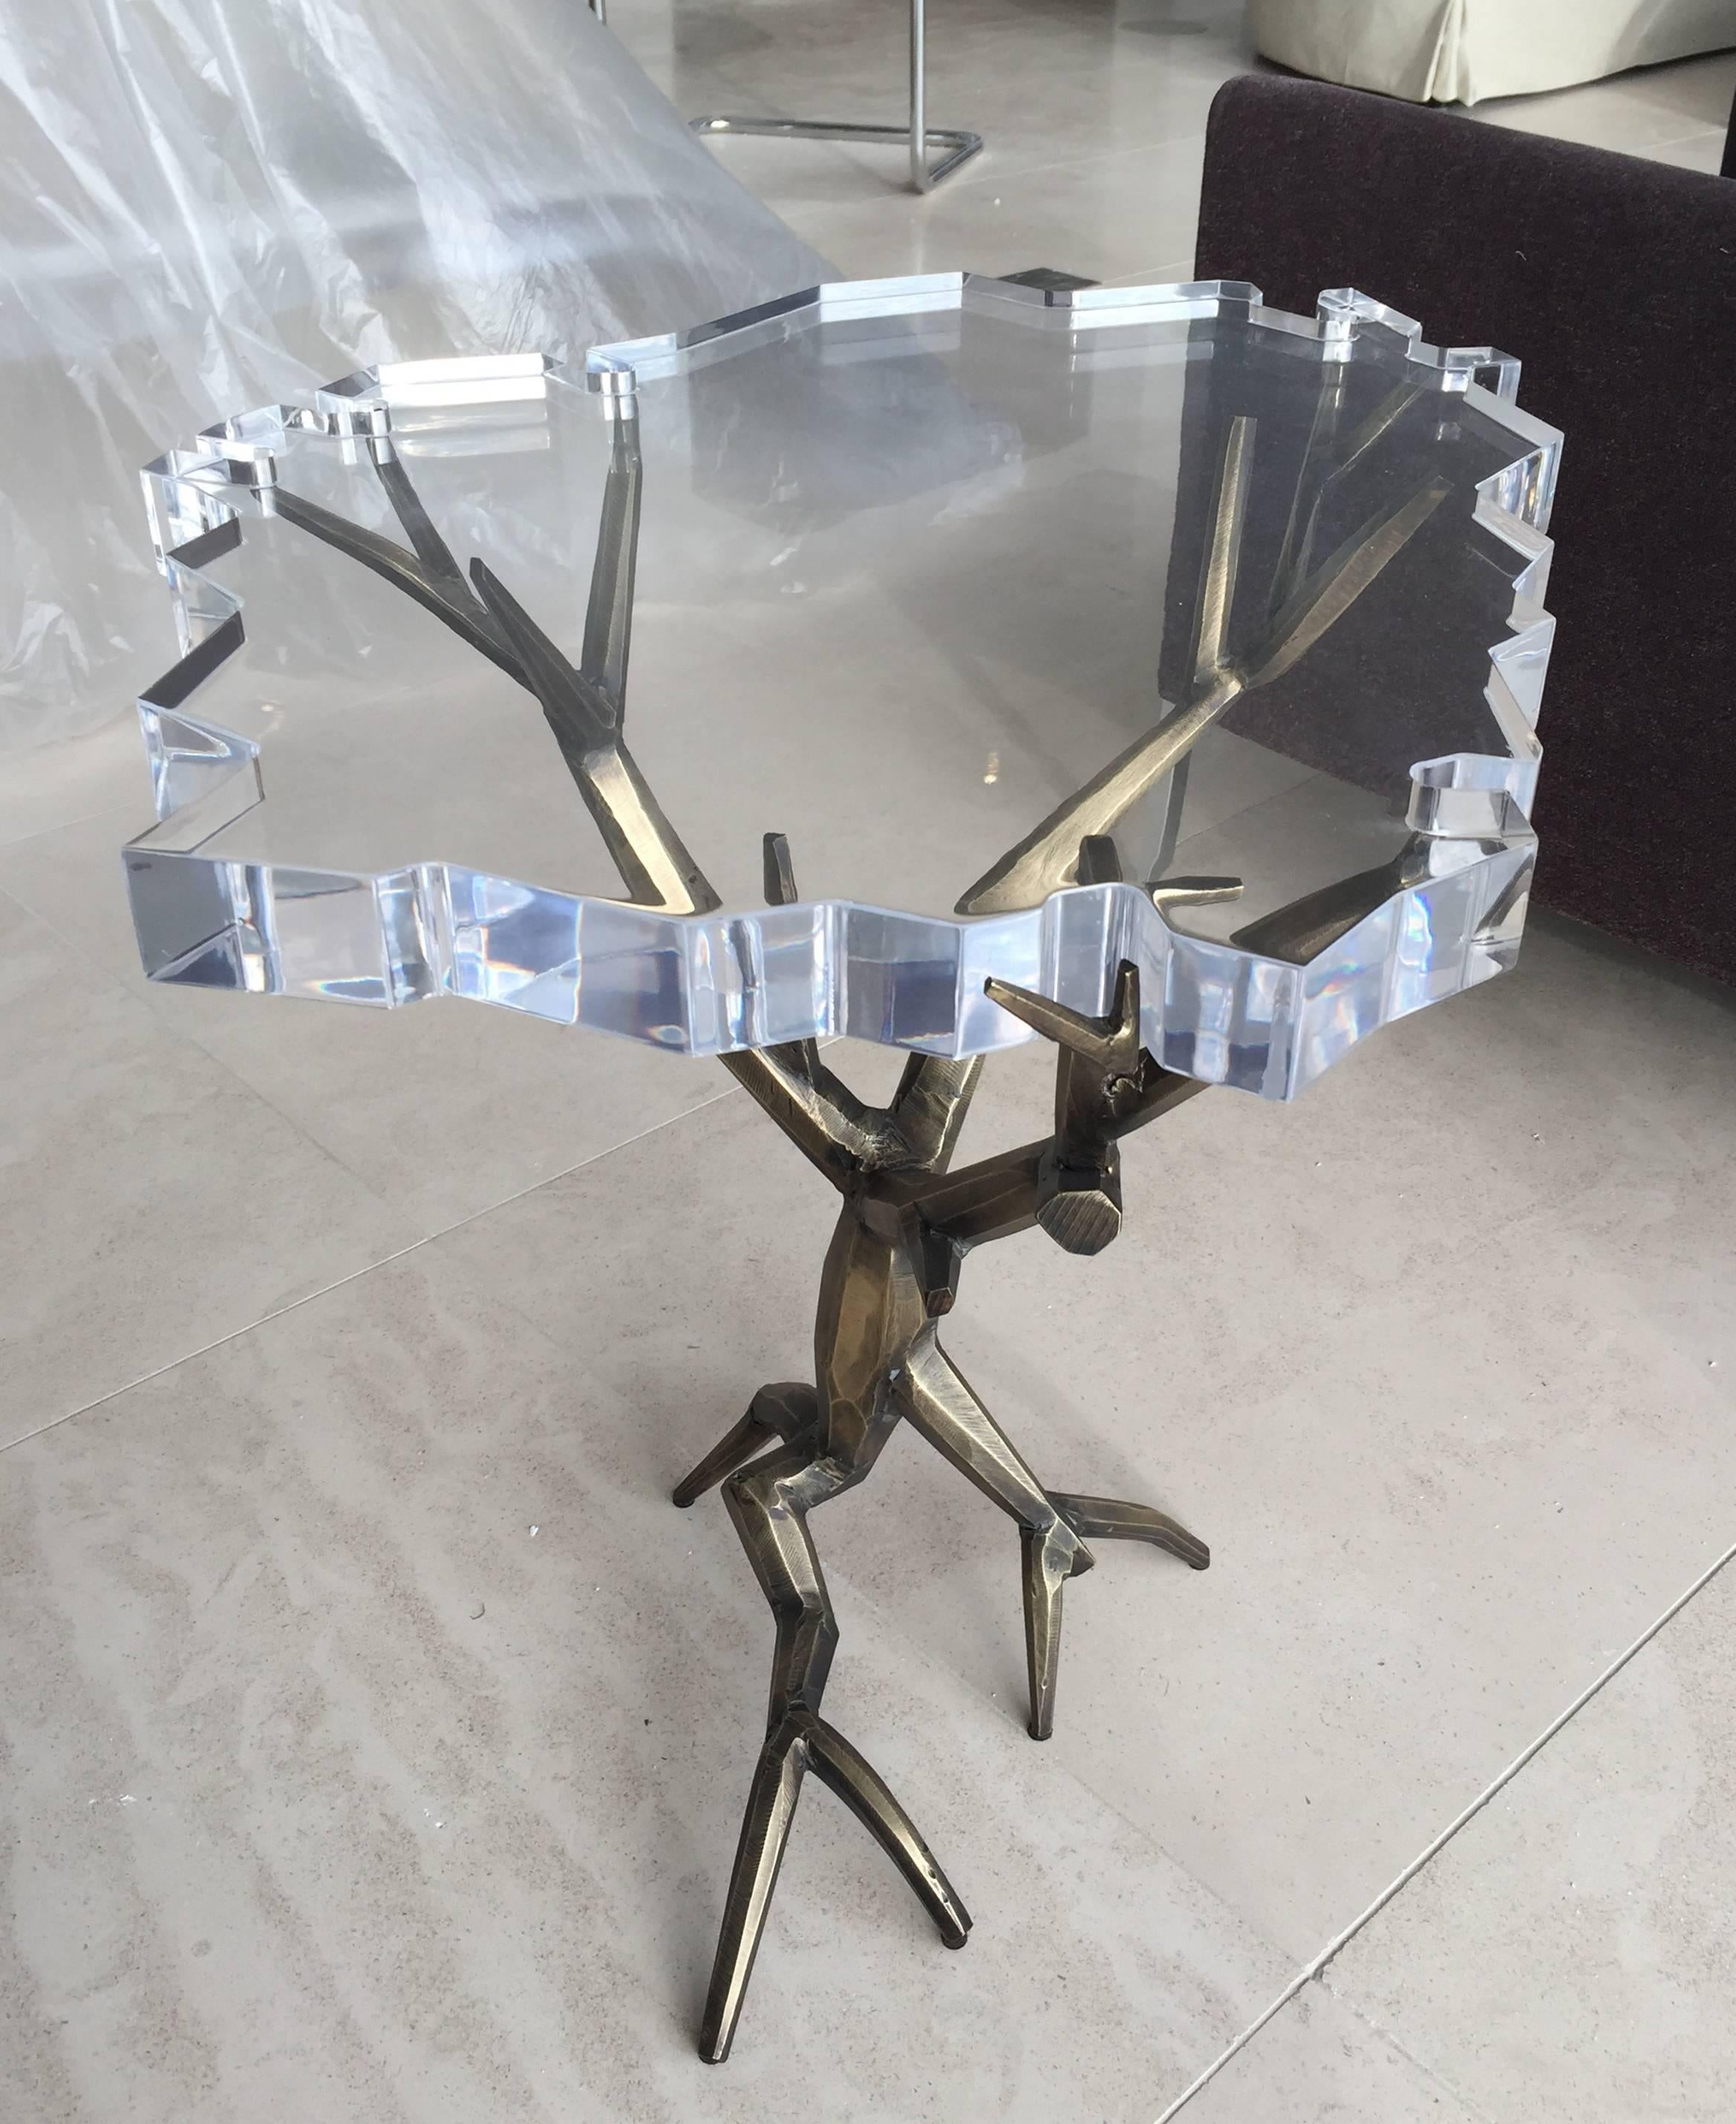 Beautiful side table made out of solid brass with a bronze finish is a one of a kind creation by designer Amparo Calderon Tapia designed exclusively for Cain Modern.
The piece is part of the series 